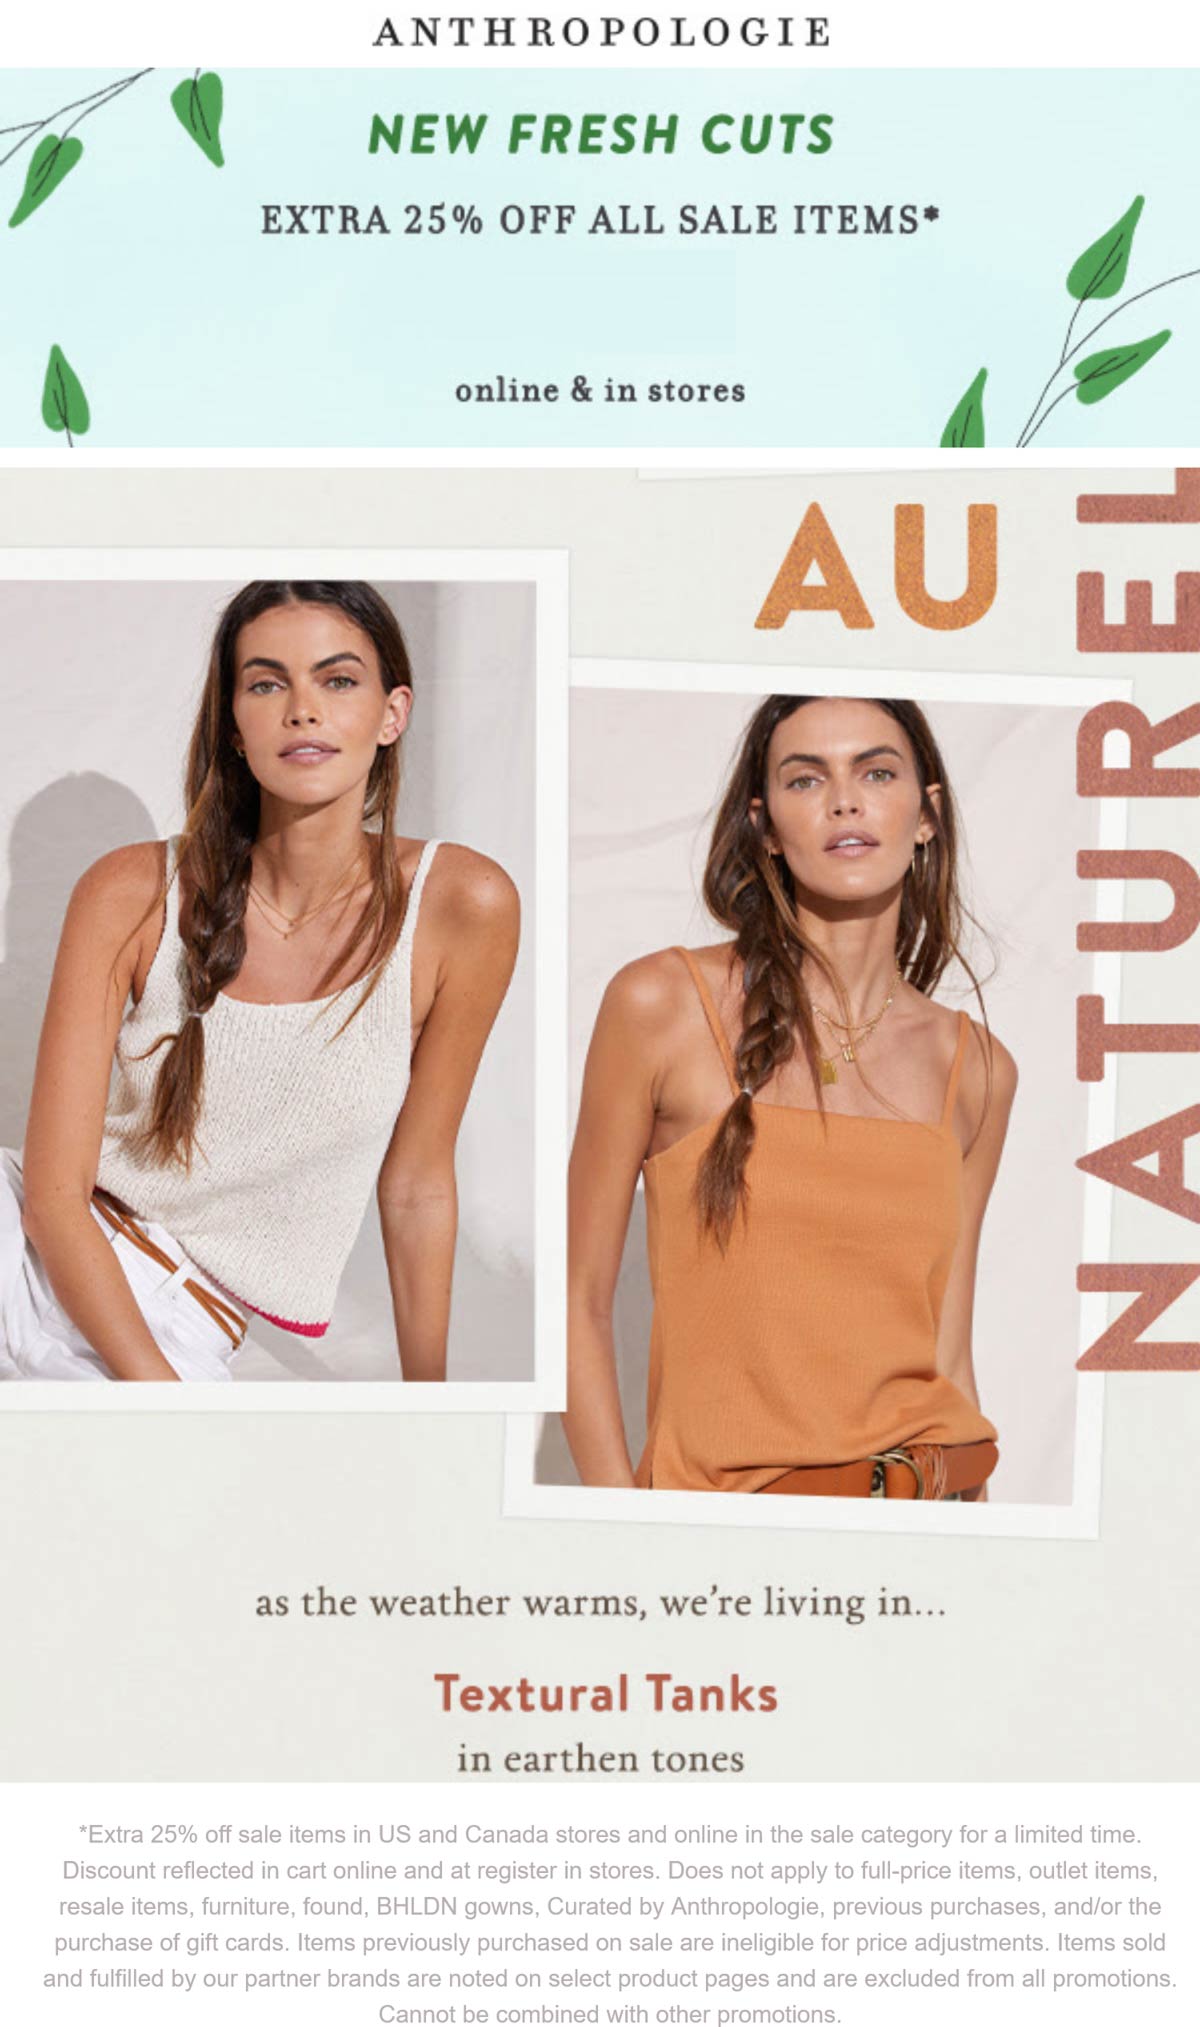 Anthropologie stores Coupon  Extra 25% off sale items at Anthropologie, ditto online #anthropologie 